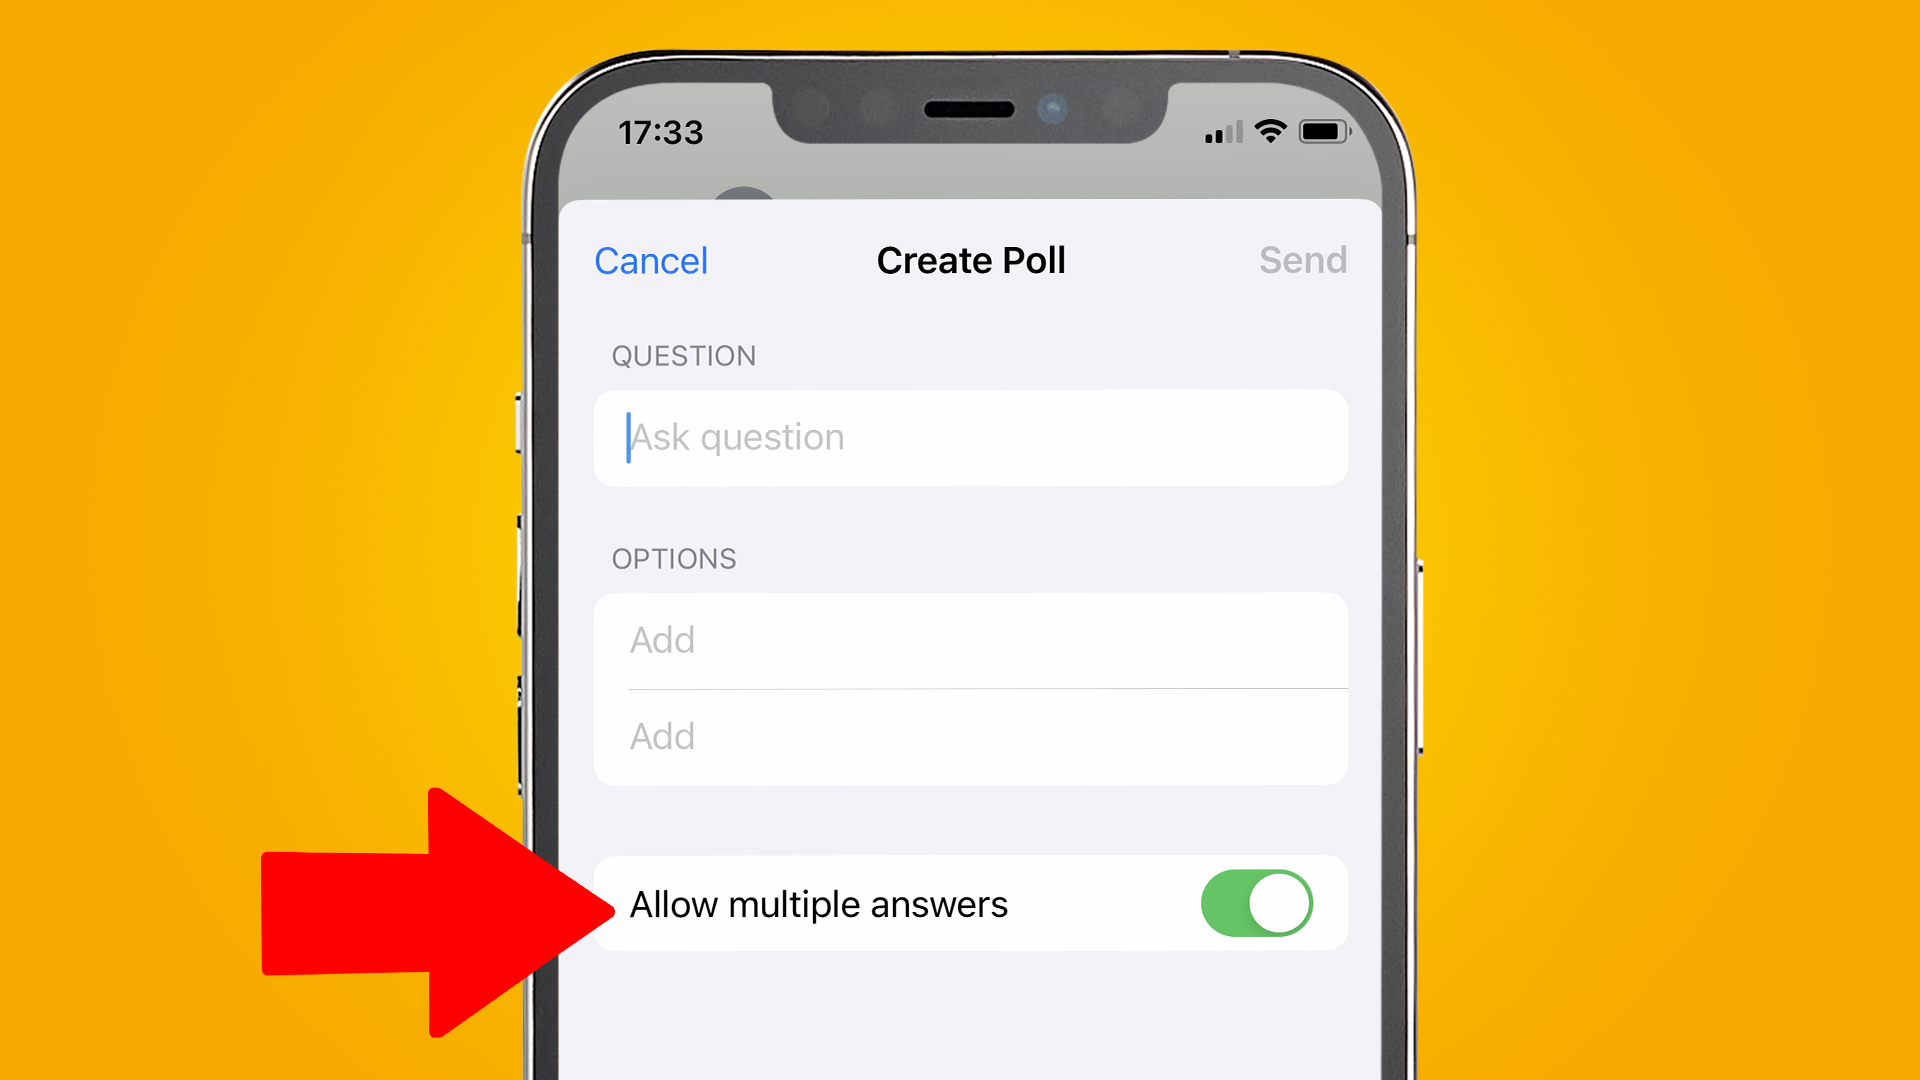 An iPhone screen on a yellow background showing a new WhatsApp feature